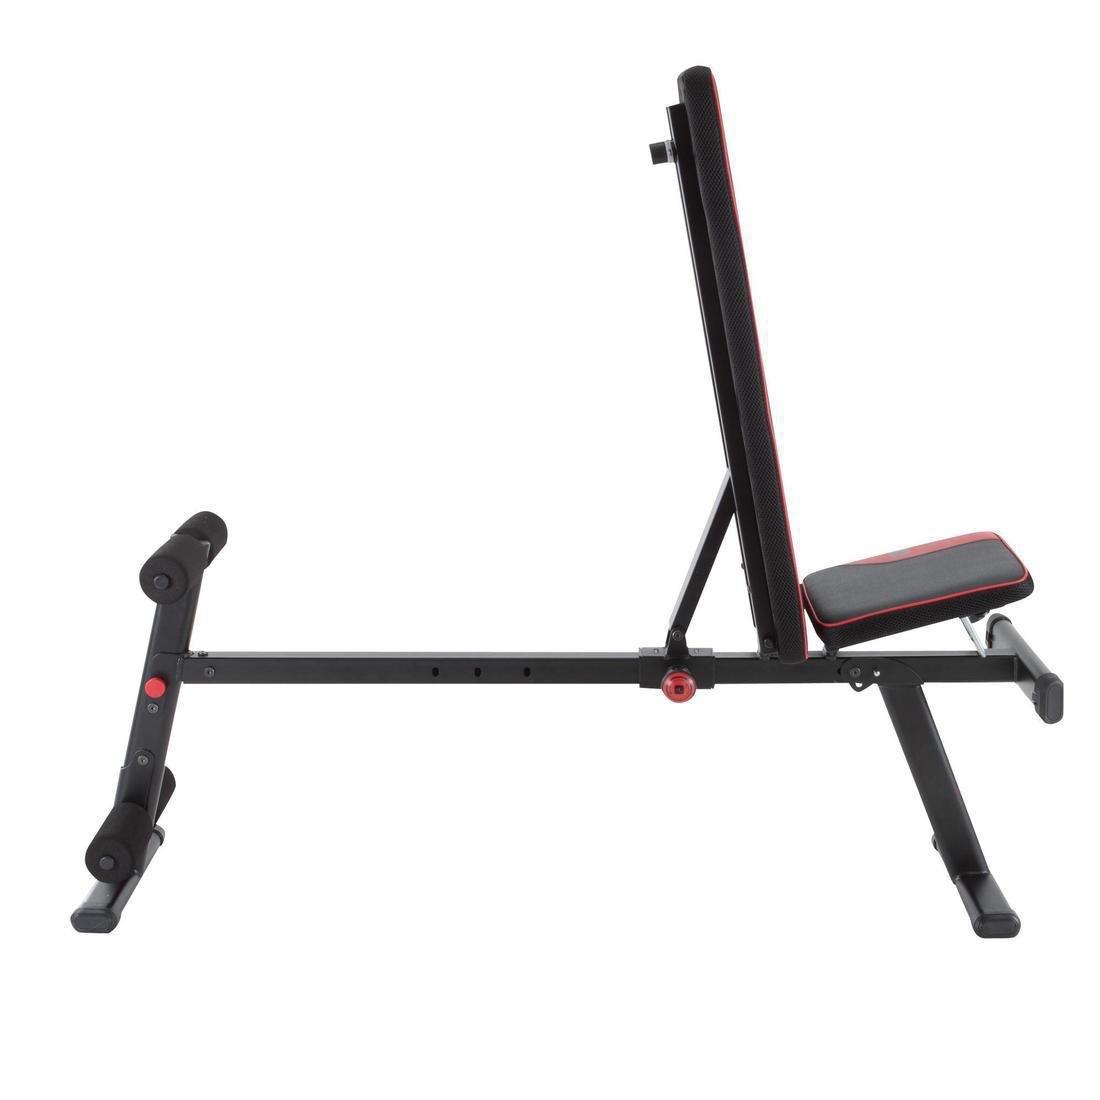 DOMYOS - 500 Fold-Down / Incline Weight Bench, Black